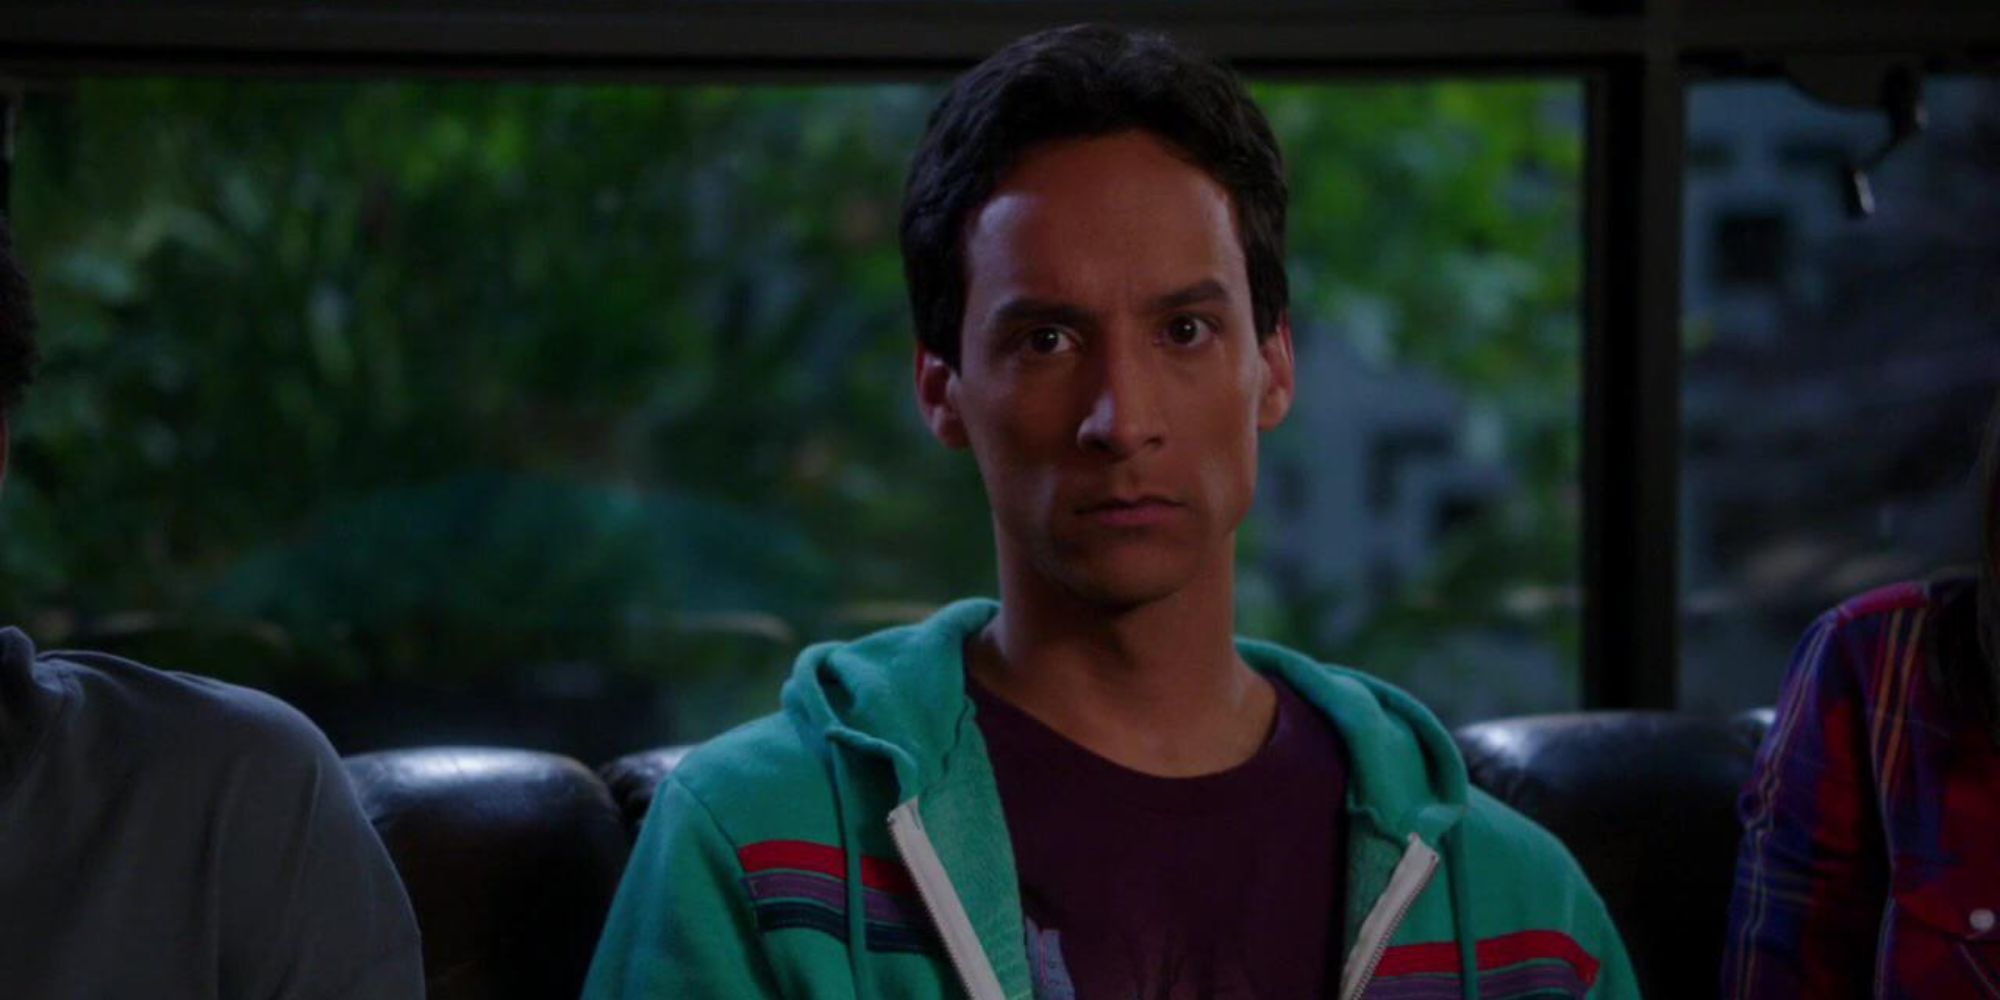 Abed Nadir (Danny Pudi) from Community staring into space, frowning